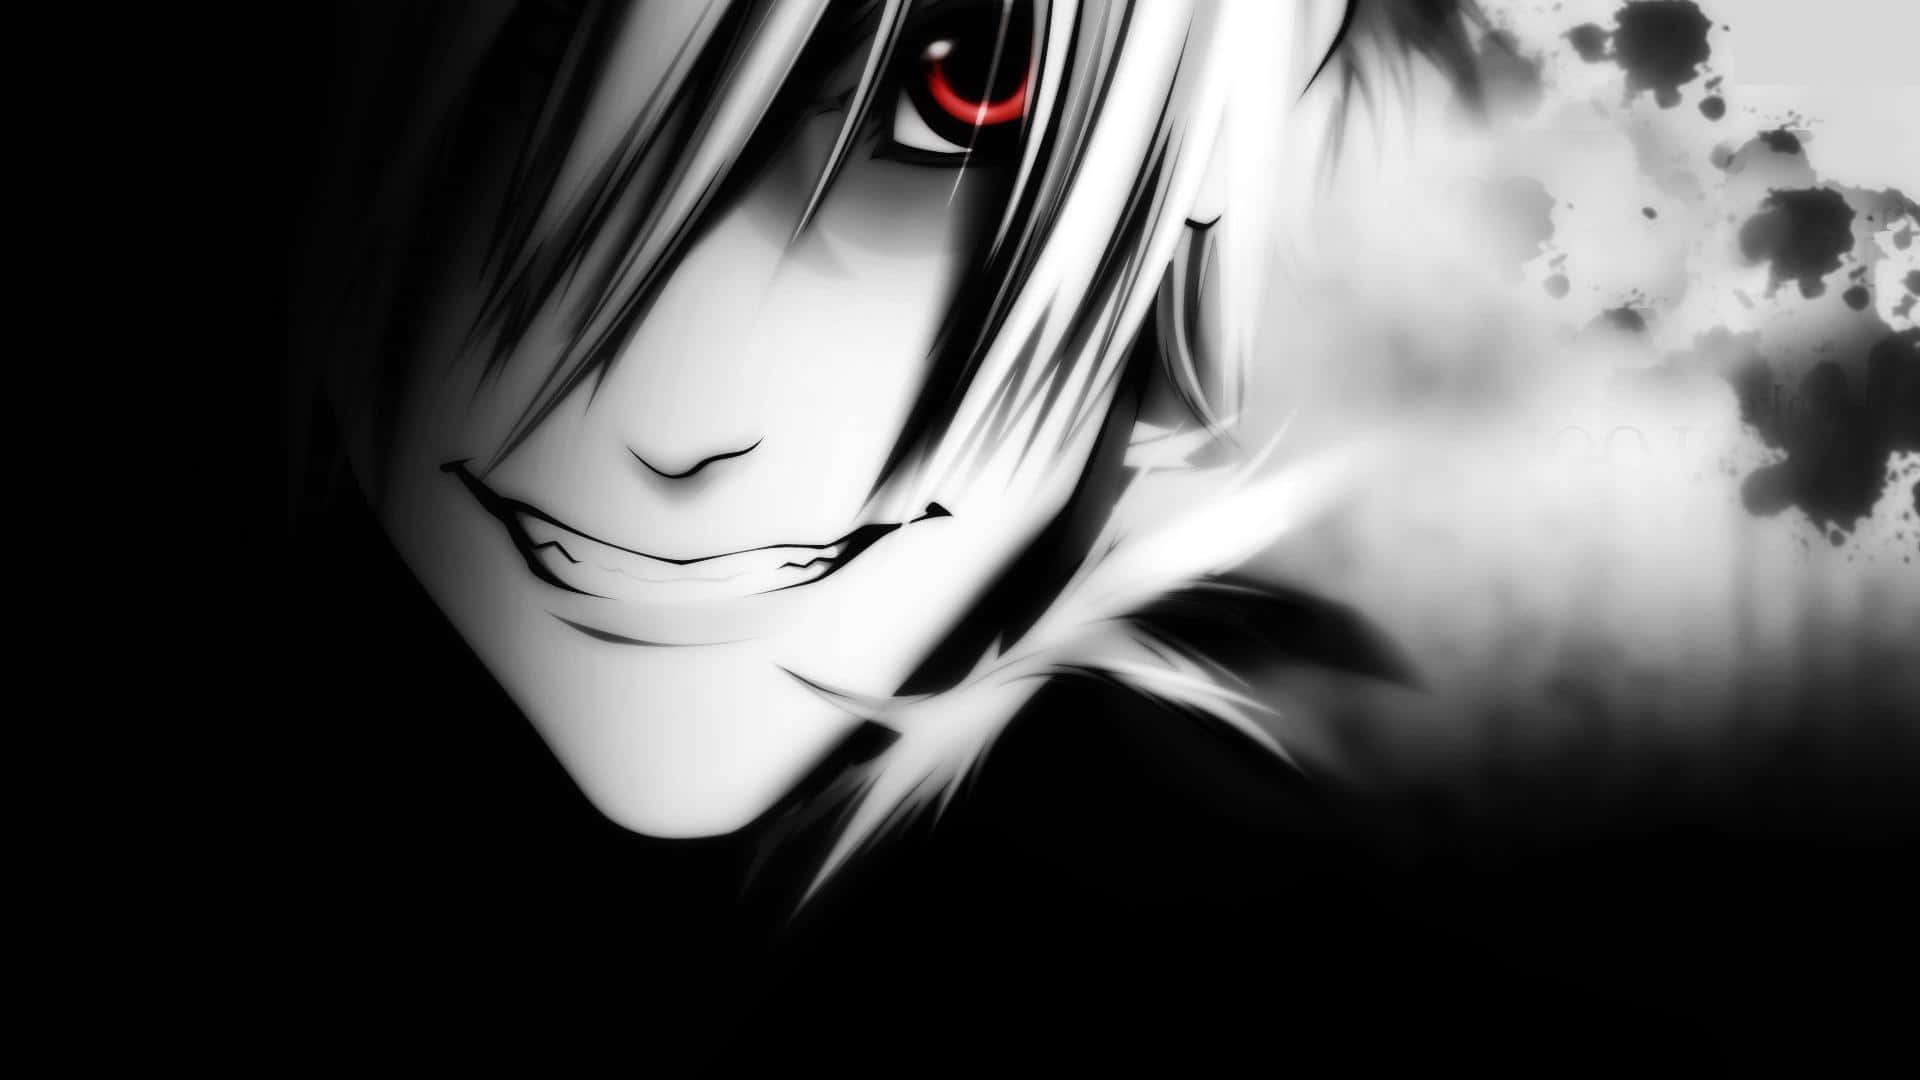 Engulfed in Shadows - Powerful Black and White Anime Scene